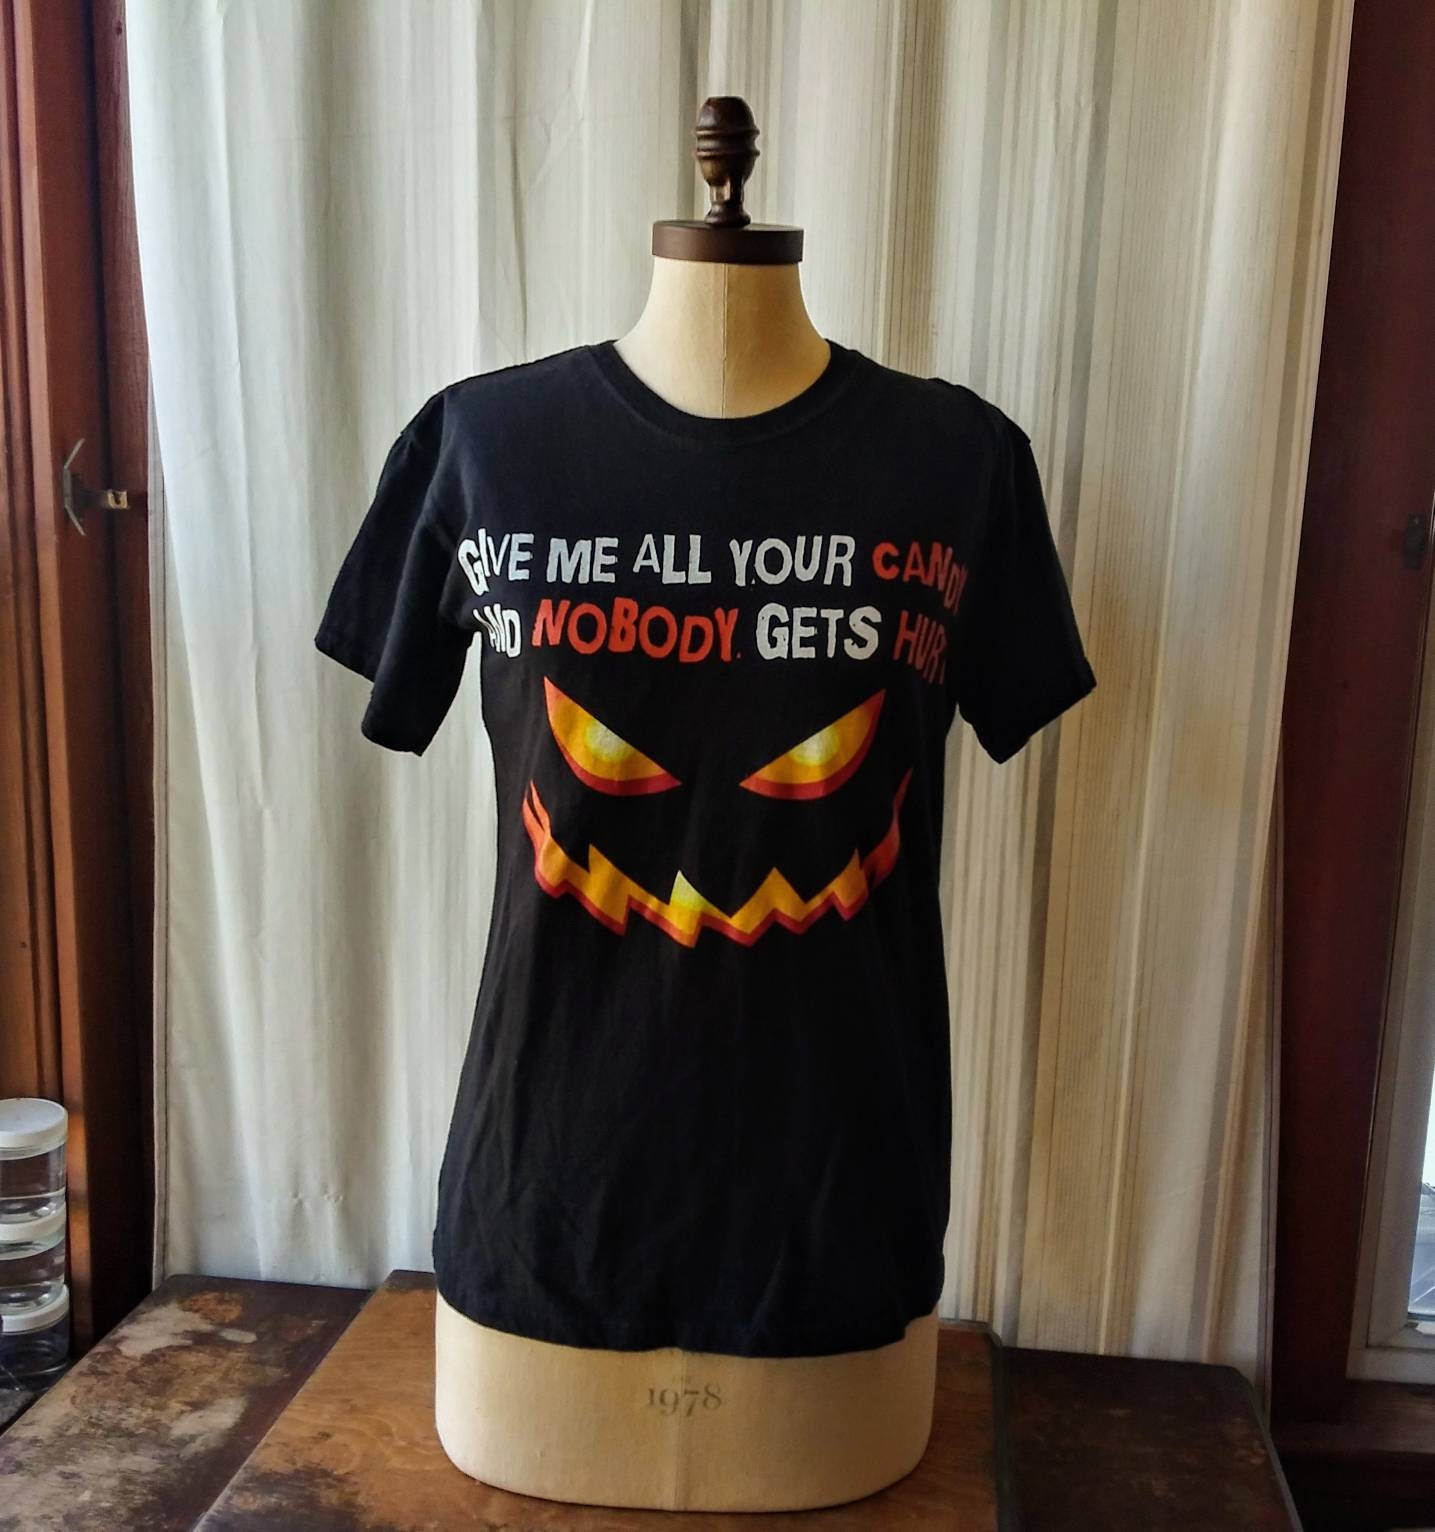 Discover Vintage Halloween T Shirt Evil Pumpkin Give Me All Your Candy Size Small Cotton 90's Fashion T Shirt Candy Corn Grin